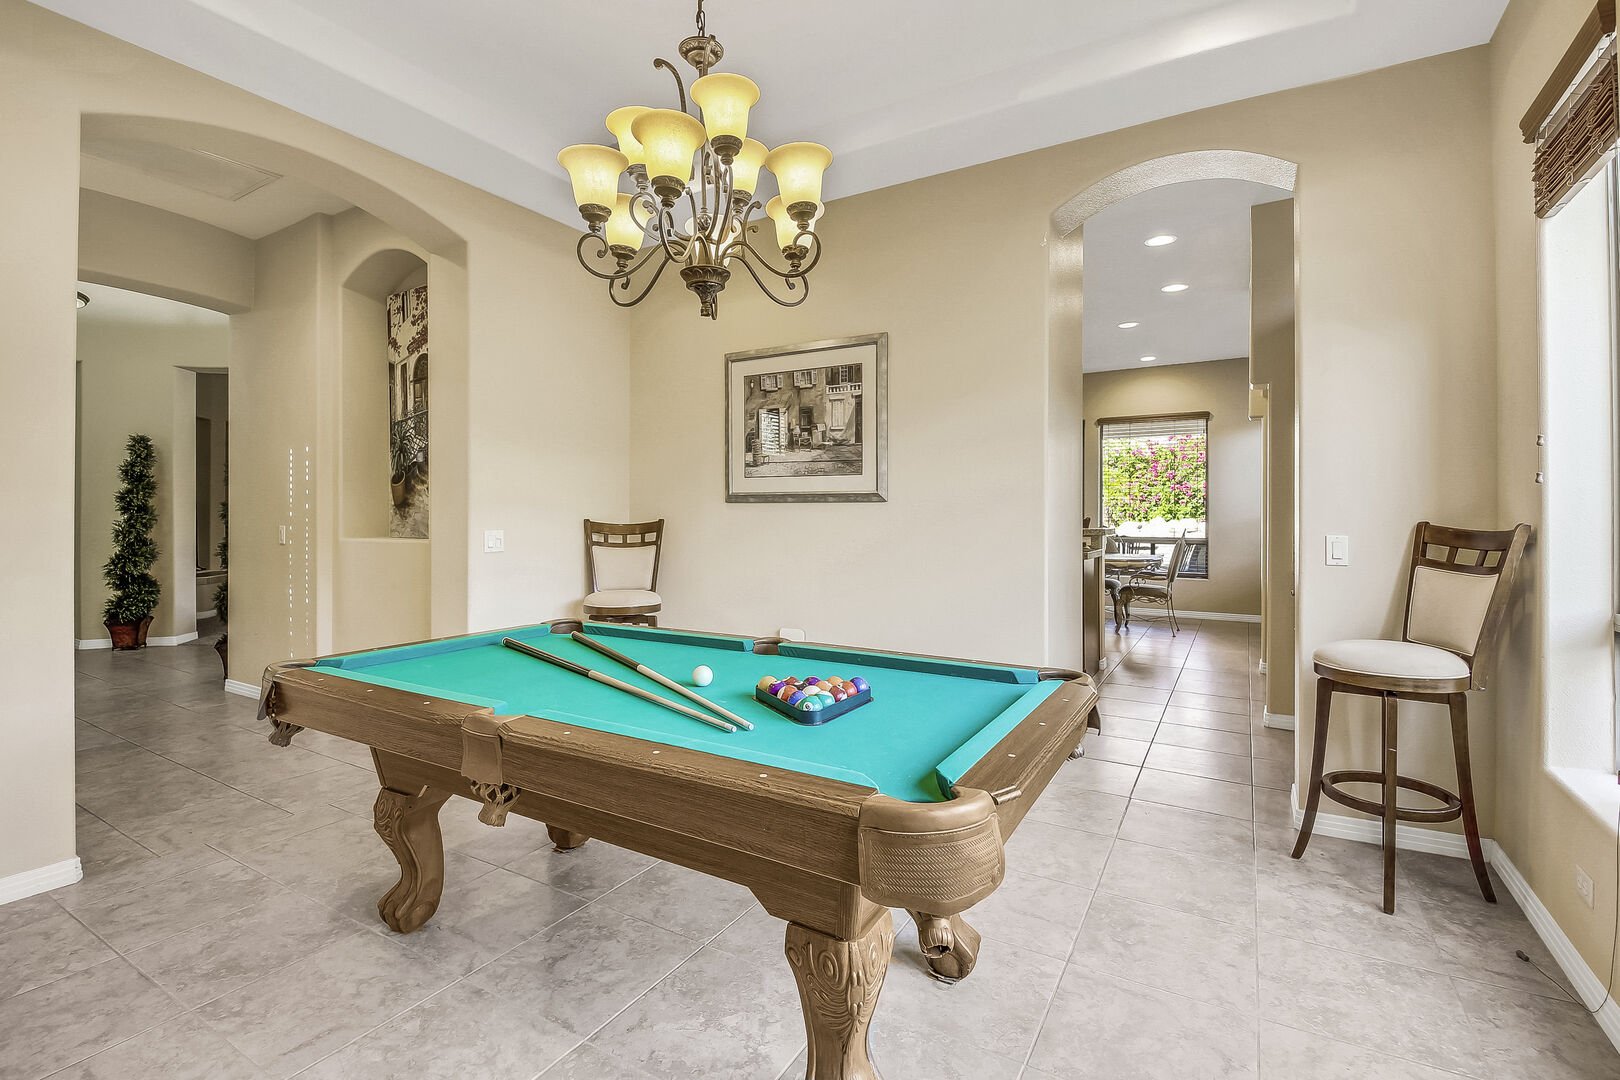 This home wouldn't be complete without a billiards table!